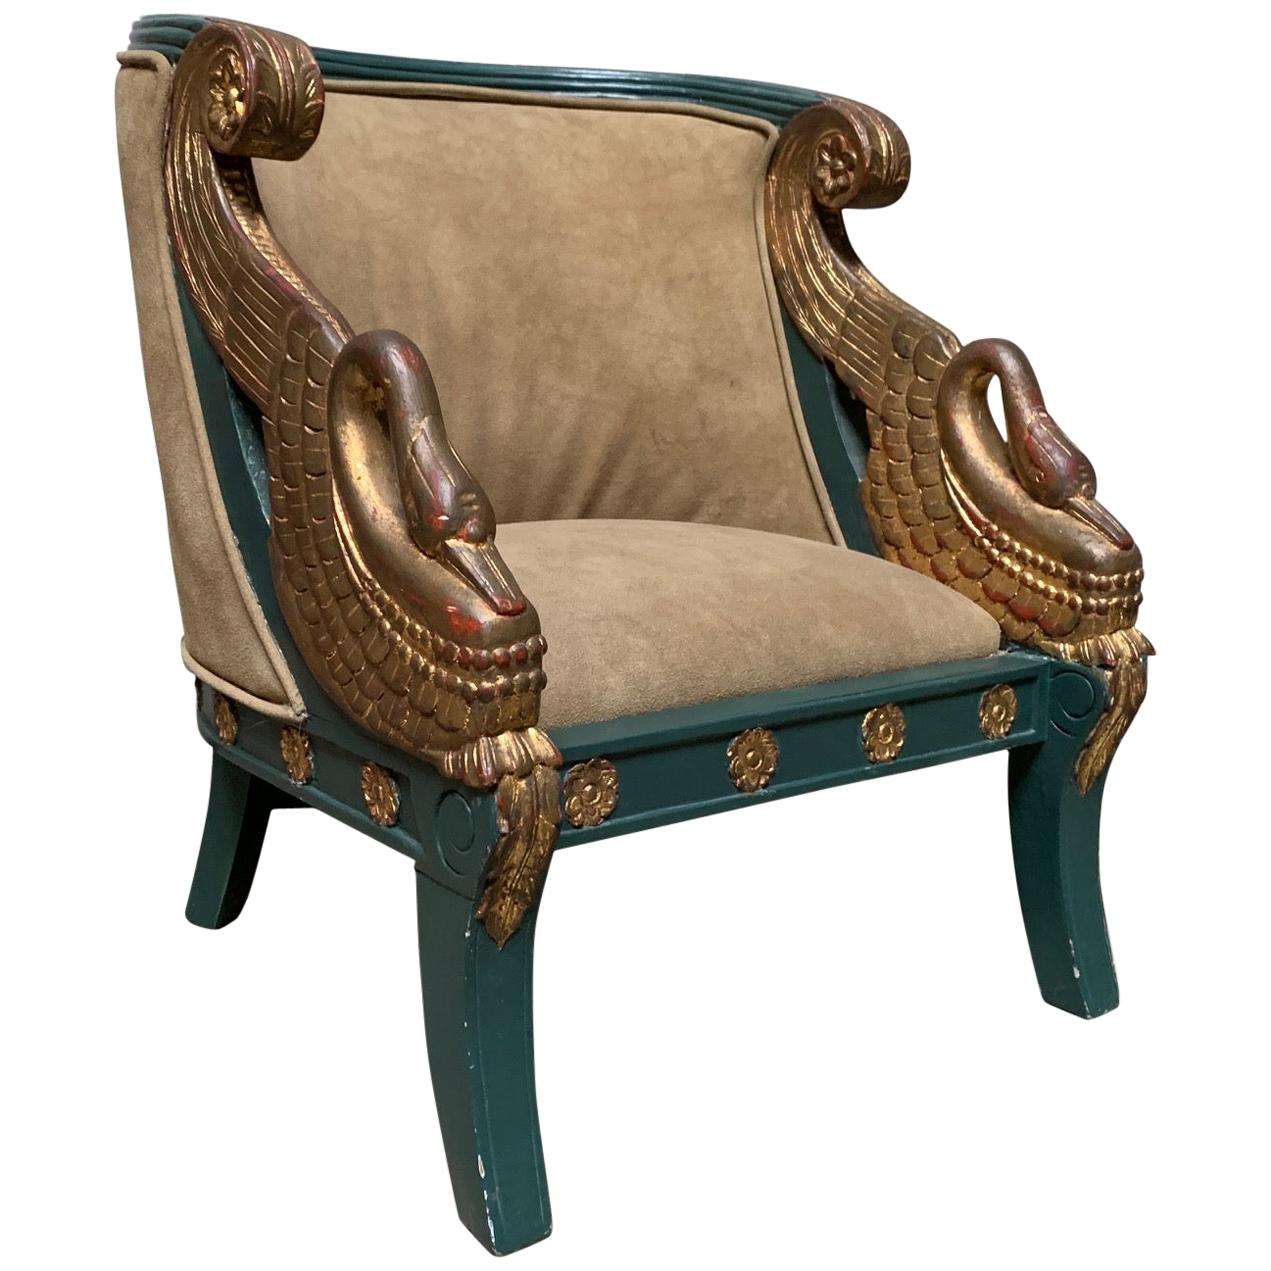 French Empire Style Childs Chair